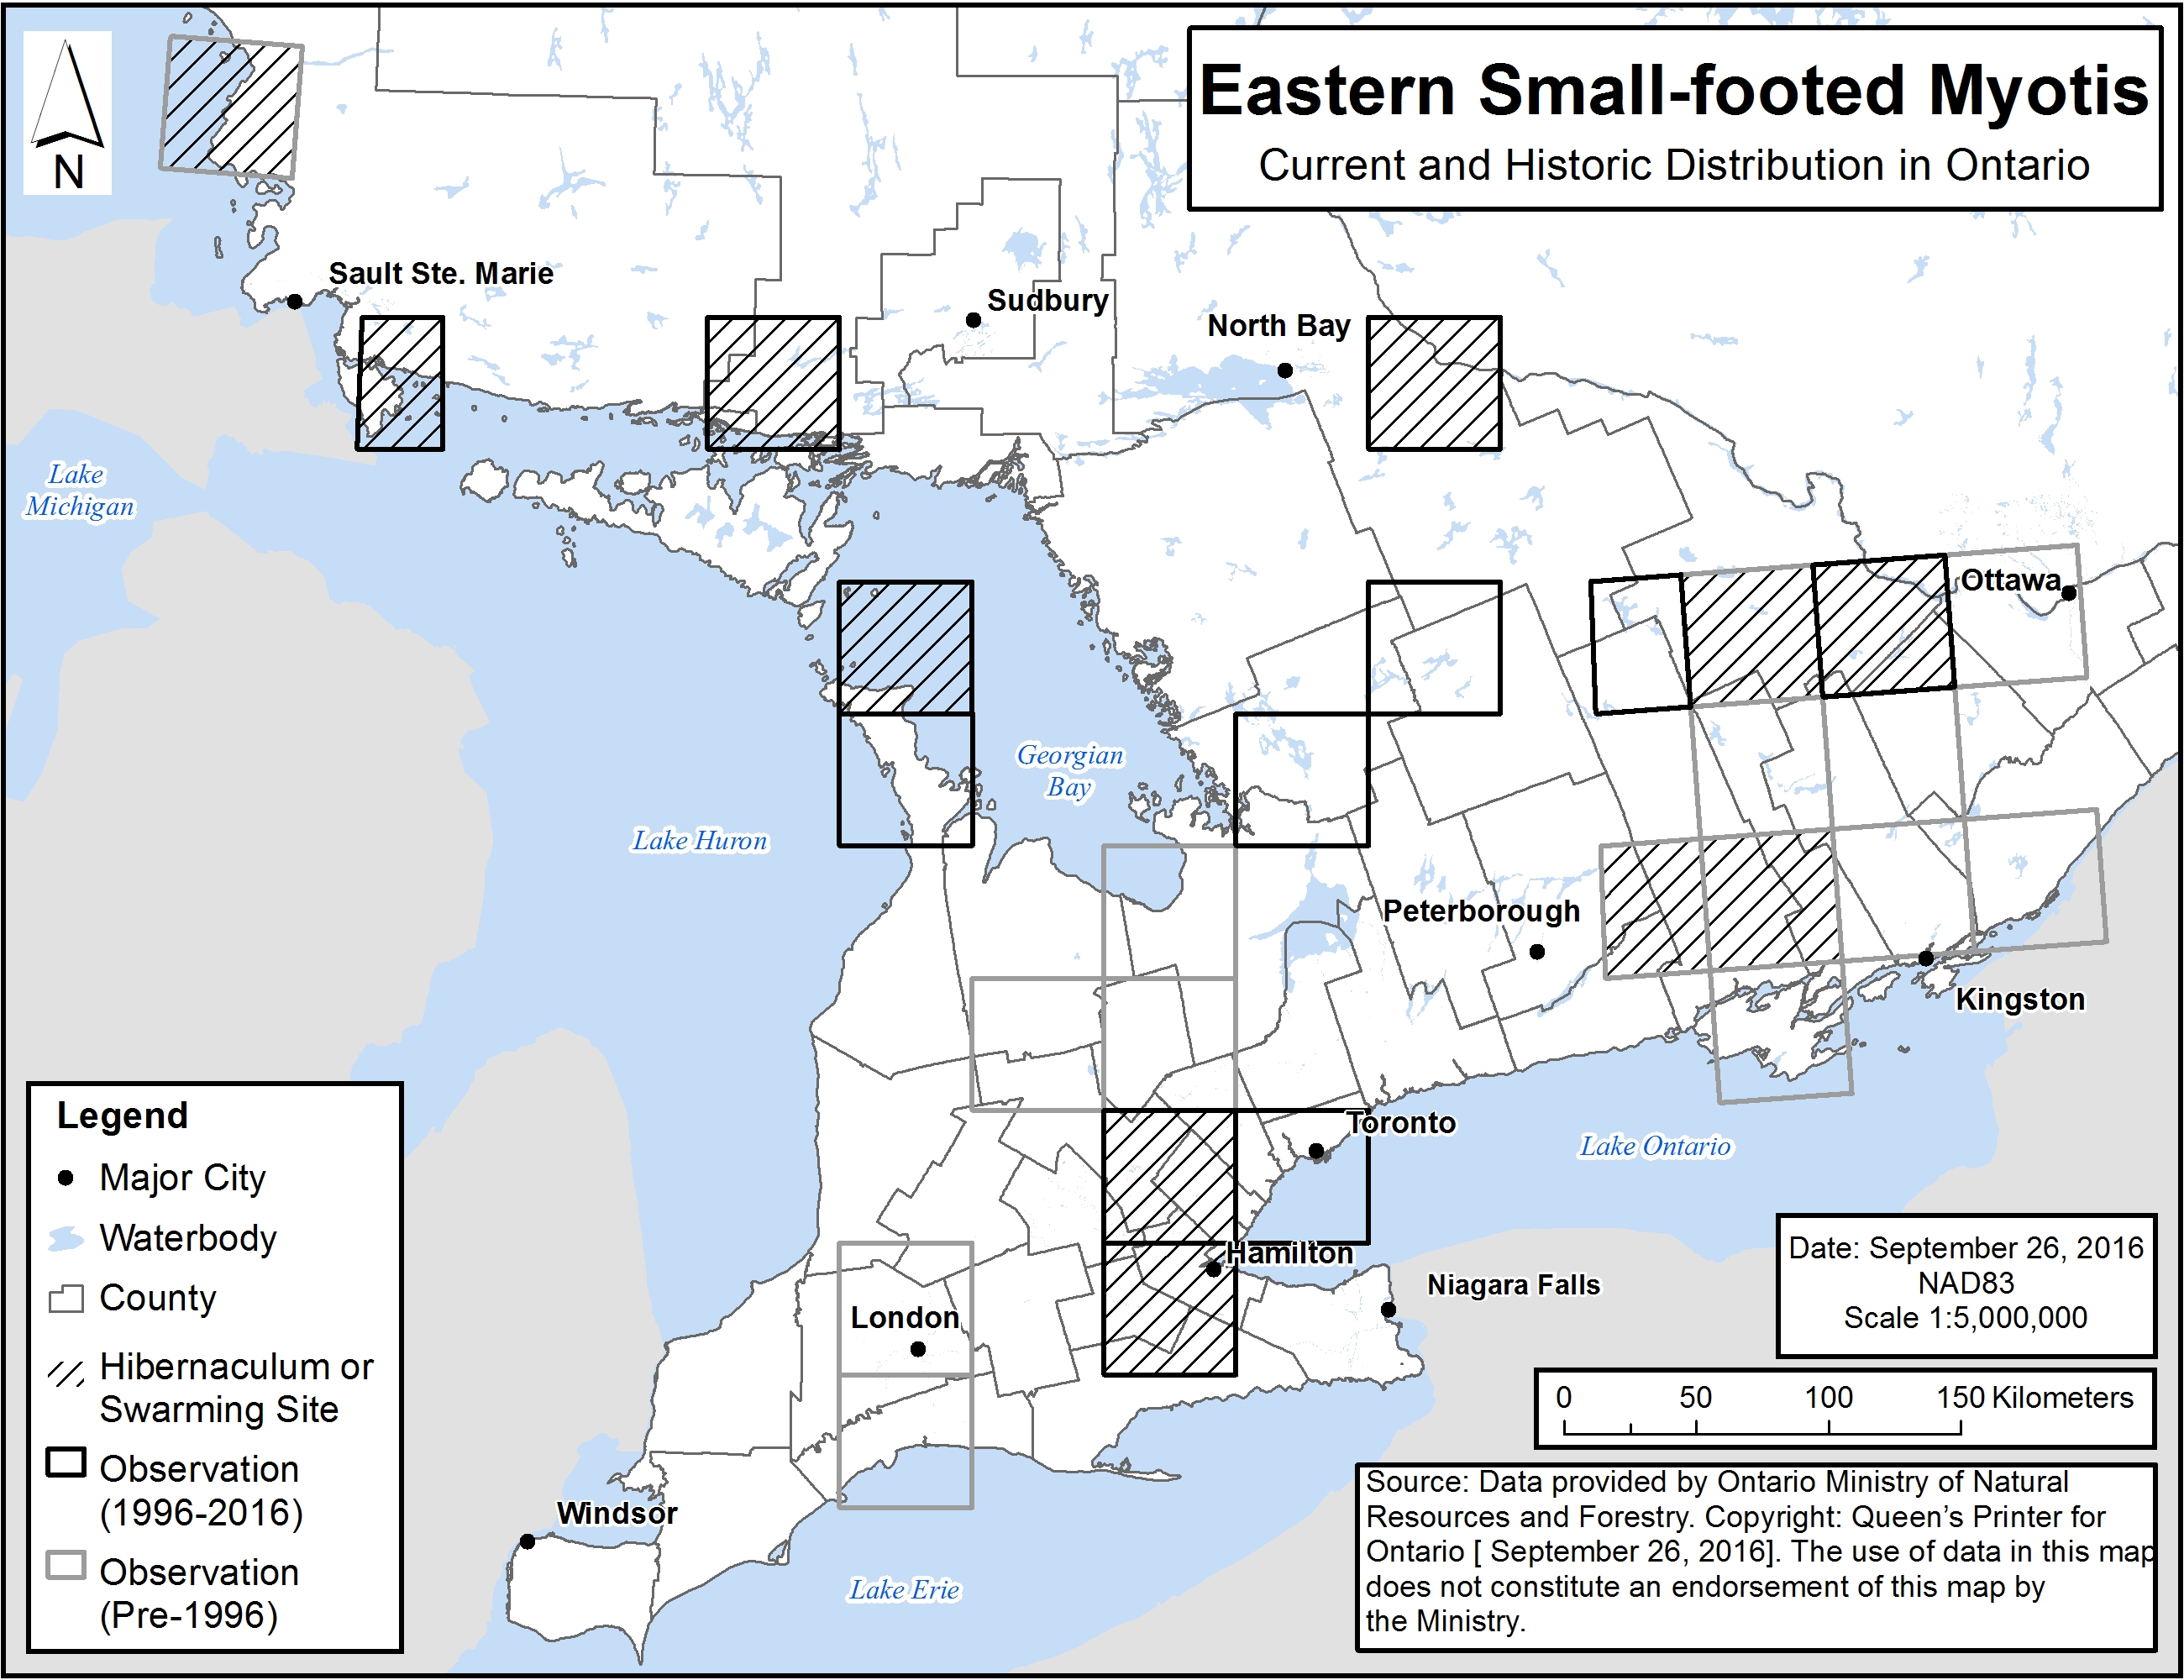 Map of the current and historical distribution of the Eastern Small-footed Myotis in Ontario. Map distinguishes observation records by time period: records from before 1996 versus records from the period 1996 to 2016. The general pattern is that there is a high density of records in Southern Ontario, with sporadic records of hibernaculum or swarming sites around the latitudes of Sault Ste. Marie, Sudbury, and North Bay.